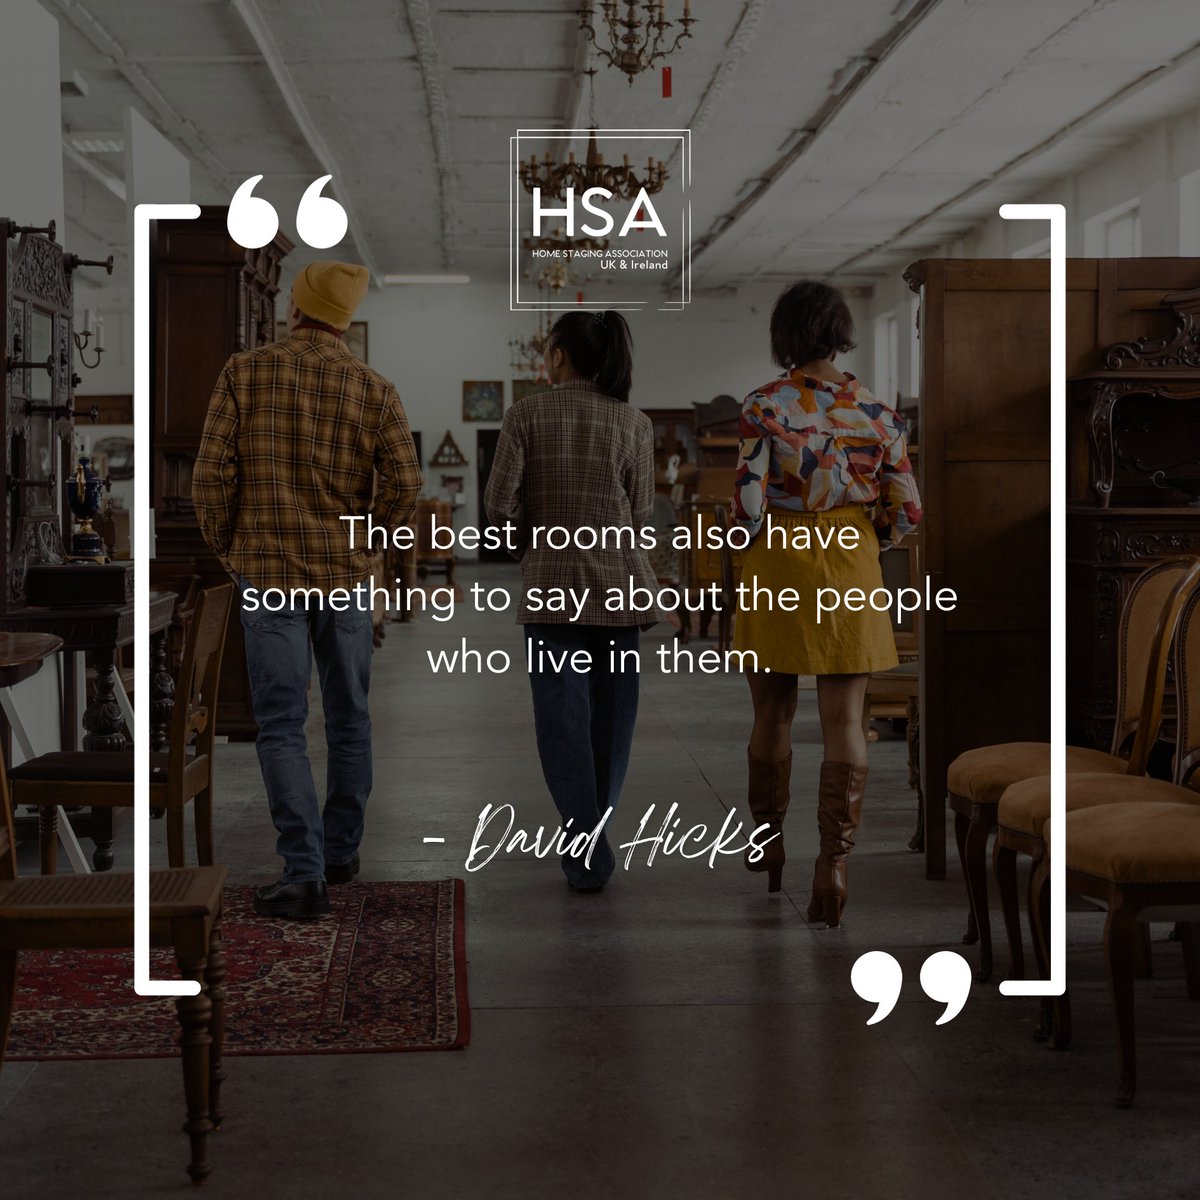 This new year, unlock the stories within each staged space. Every room is a chapter, and the best ones speak volumes about the people who call them home. 

#sundaymotivation #newyearinspiration #davidhicks #homestaging #homestaginguk #hsauk